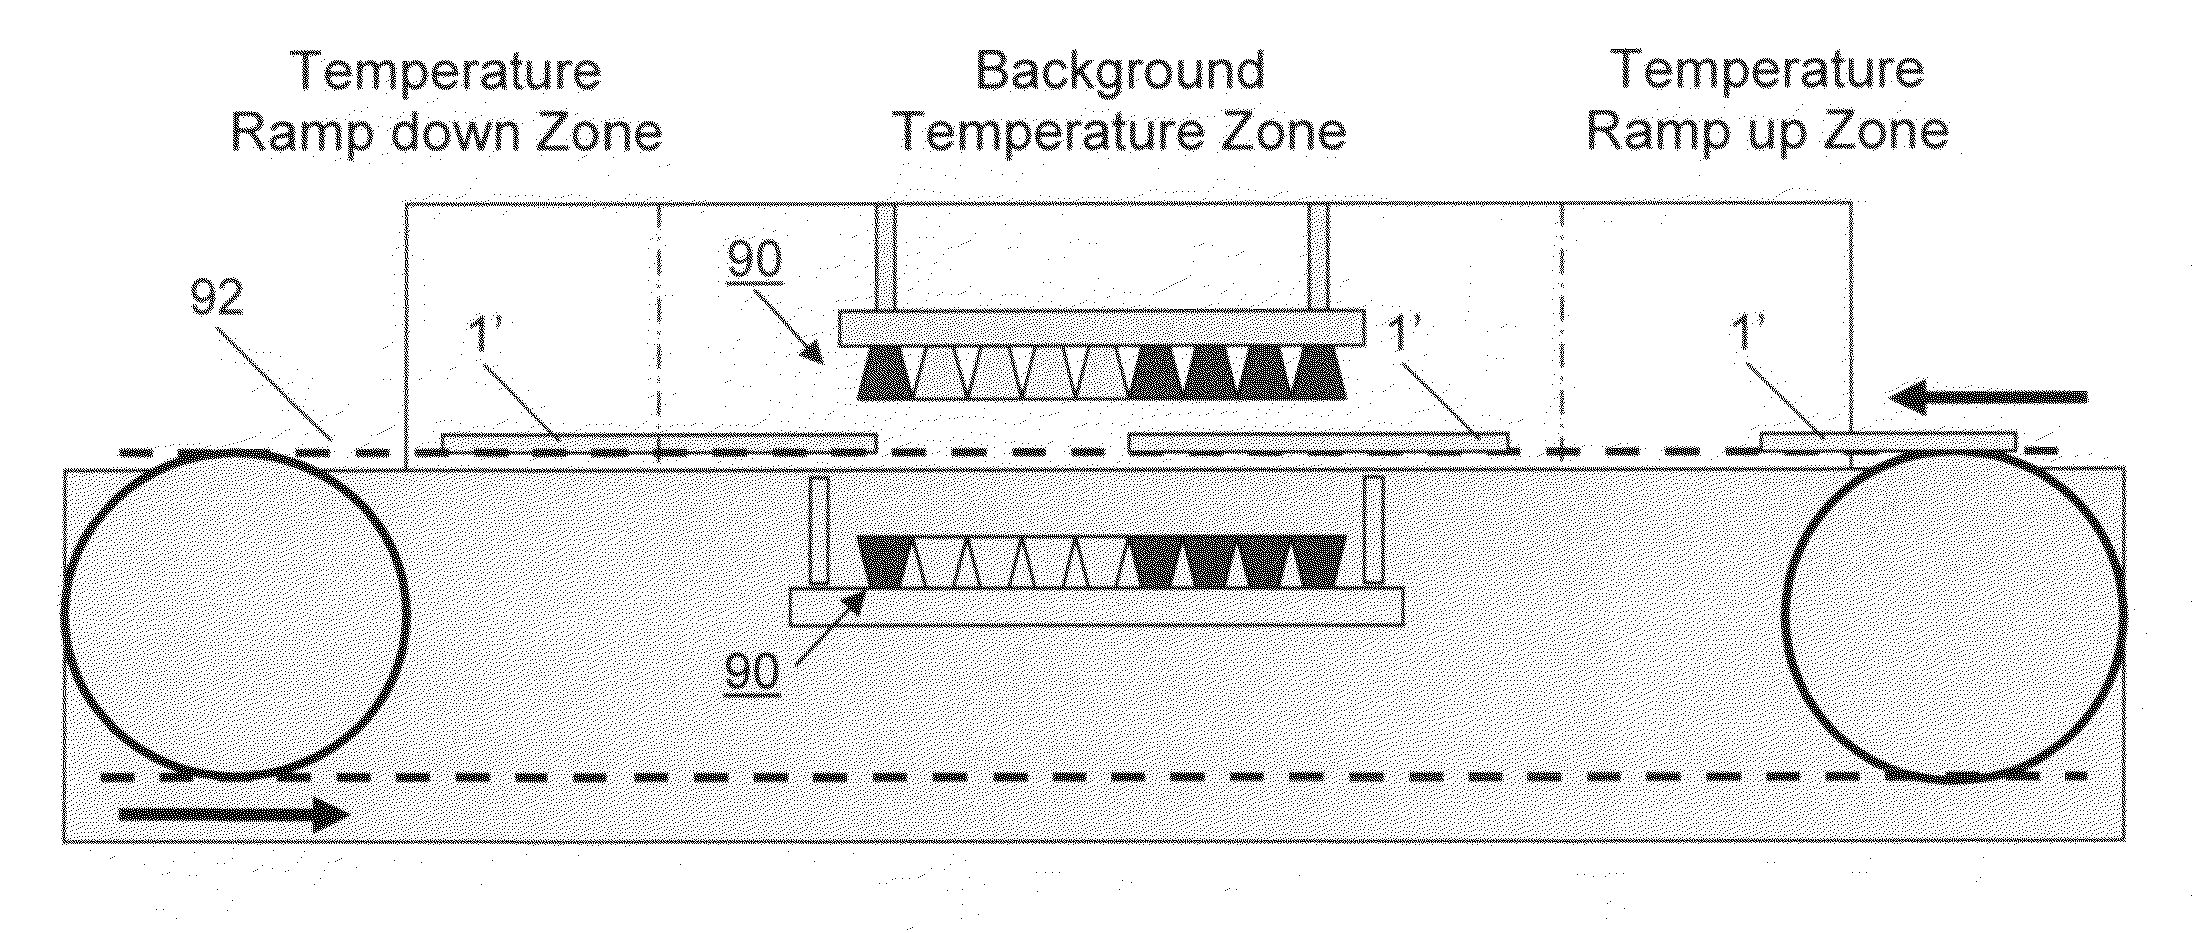 Localized heating via an infrared heat source array of edge seals for a vacuum insulating glass unit, and/or unitized oven with infrared heat source array for accomplishing the same